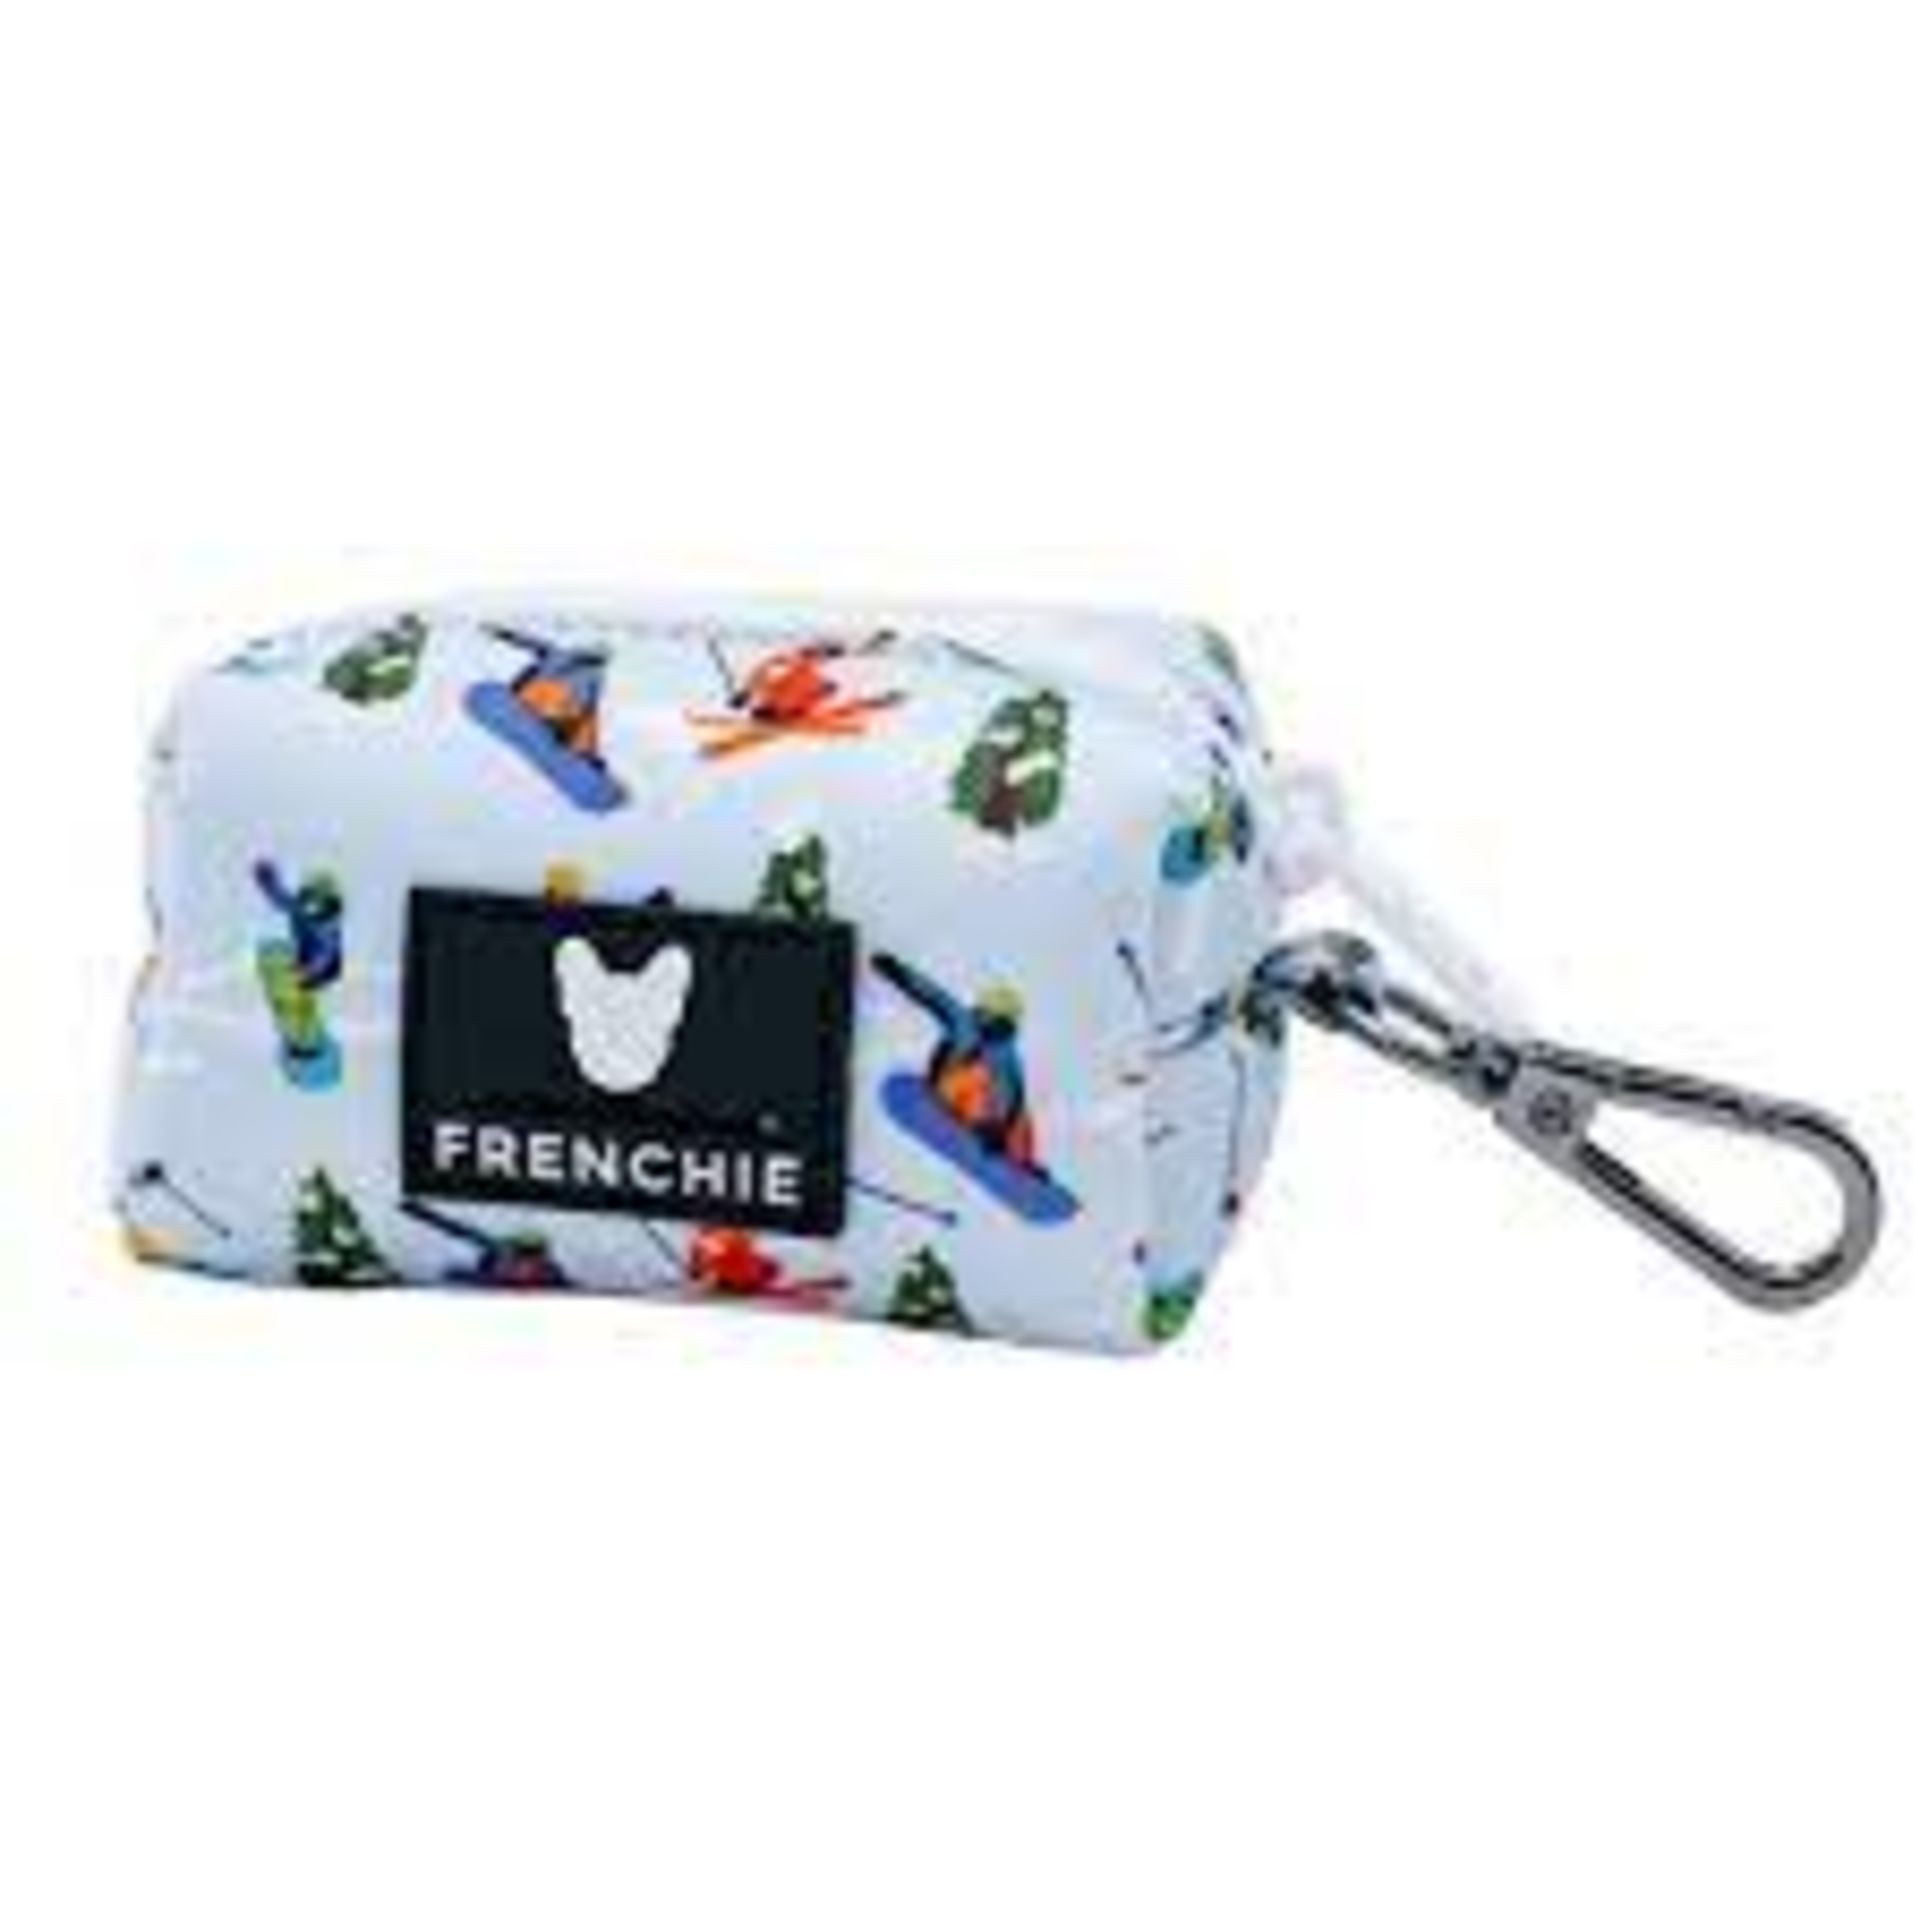 Trade Lot 100 X New .Packaged Frenchie The Bulldog Luxury Branded Dog Products. May include items - Image 17 of 50